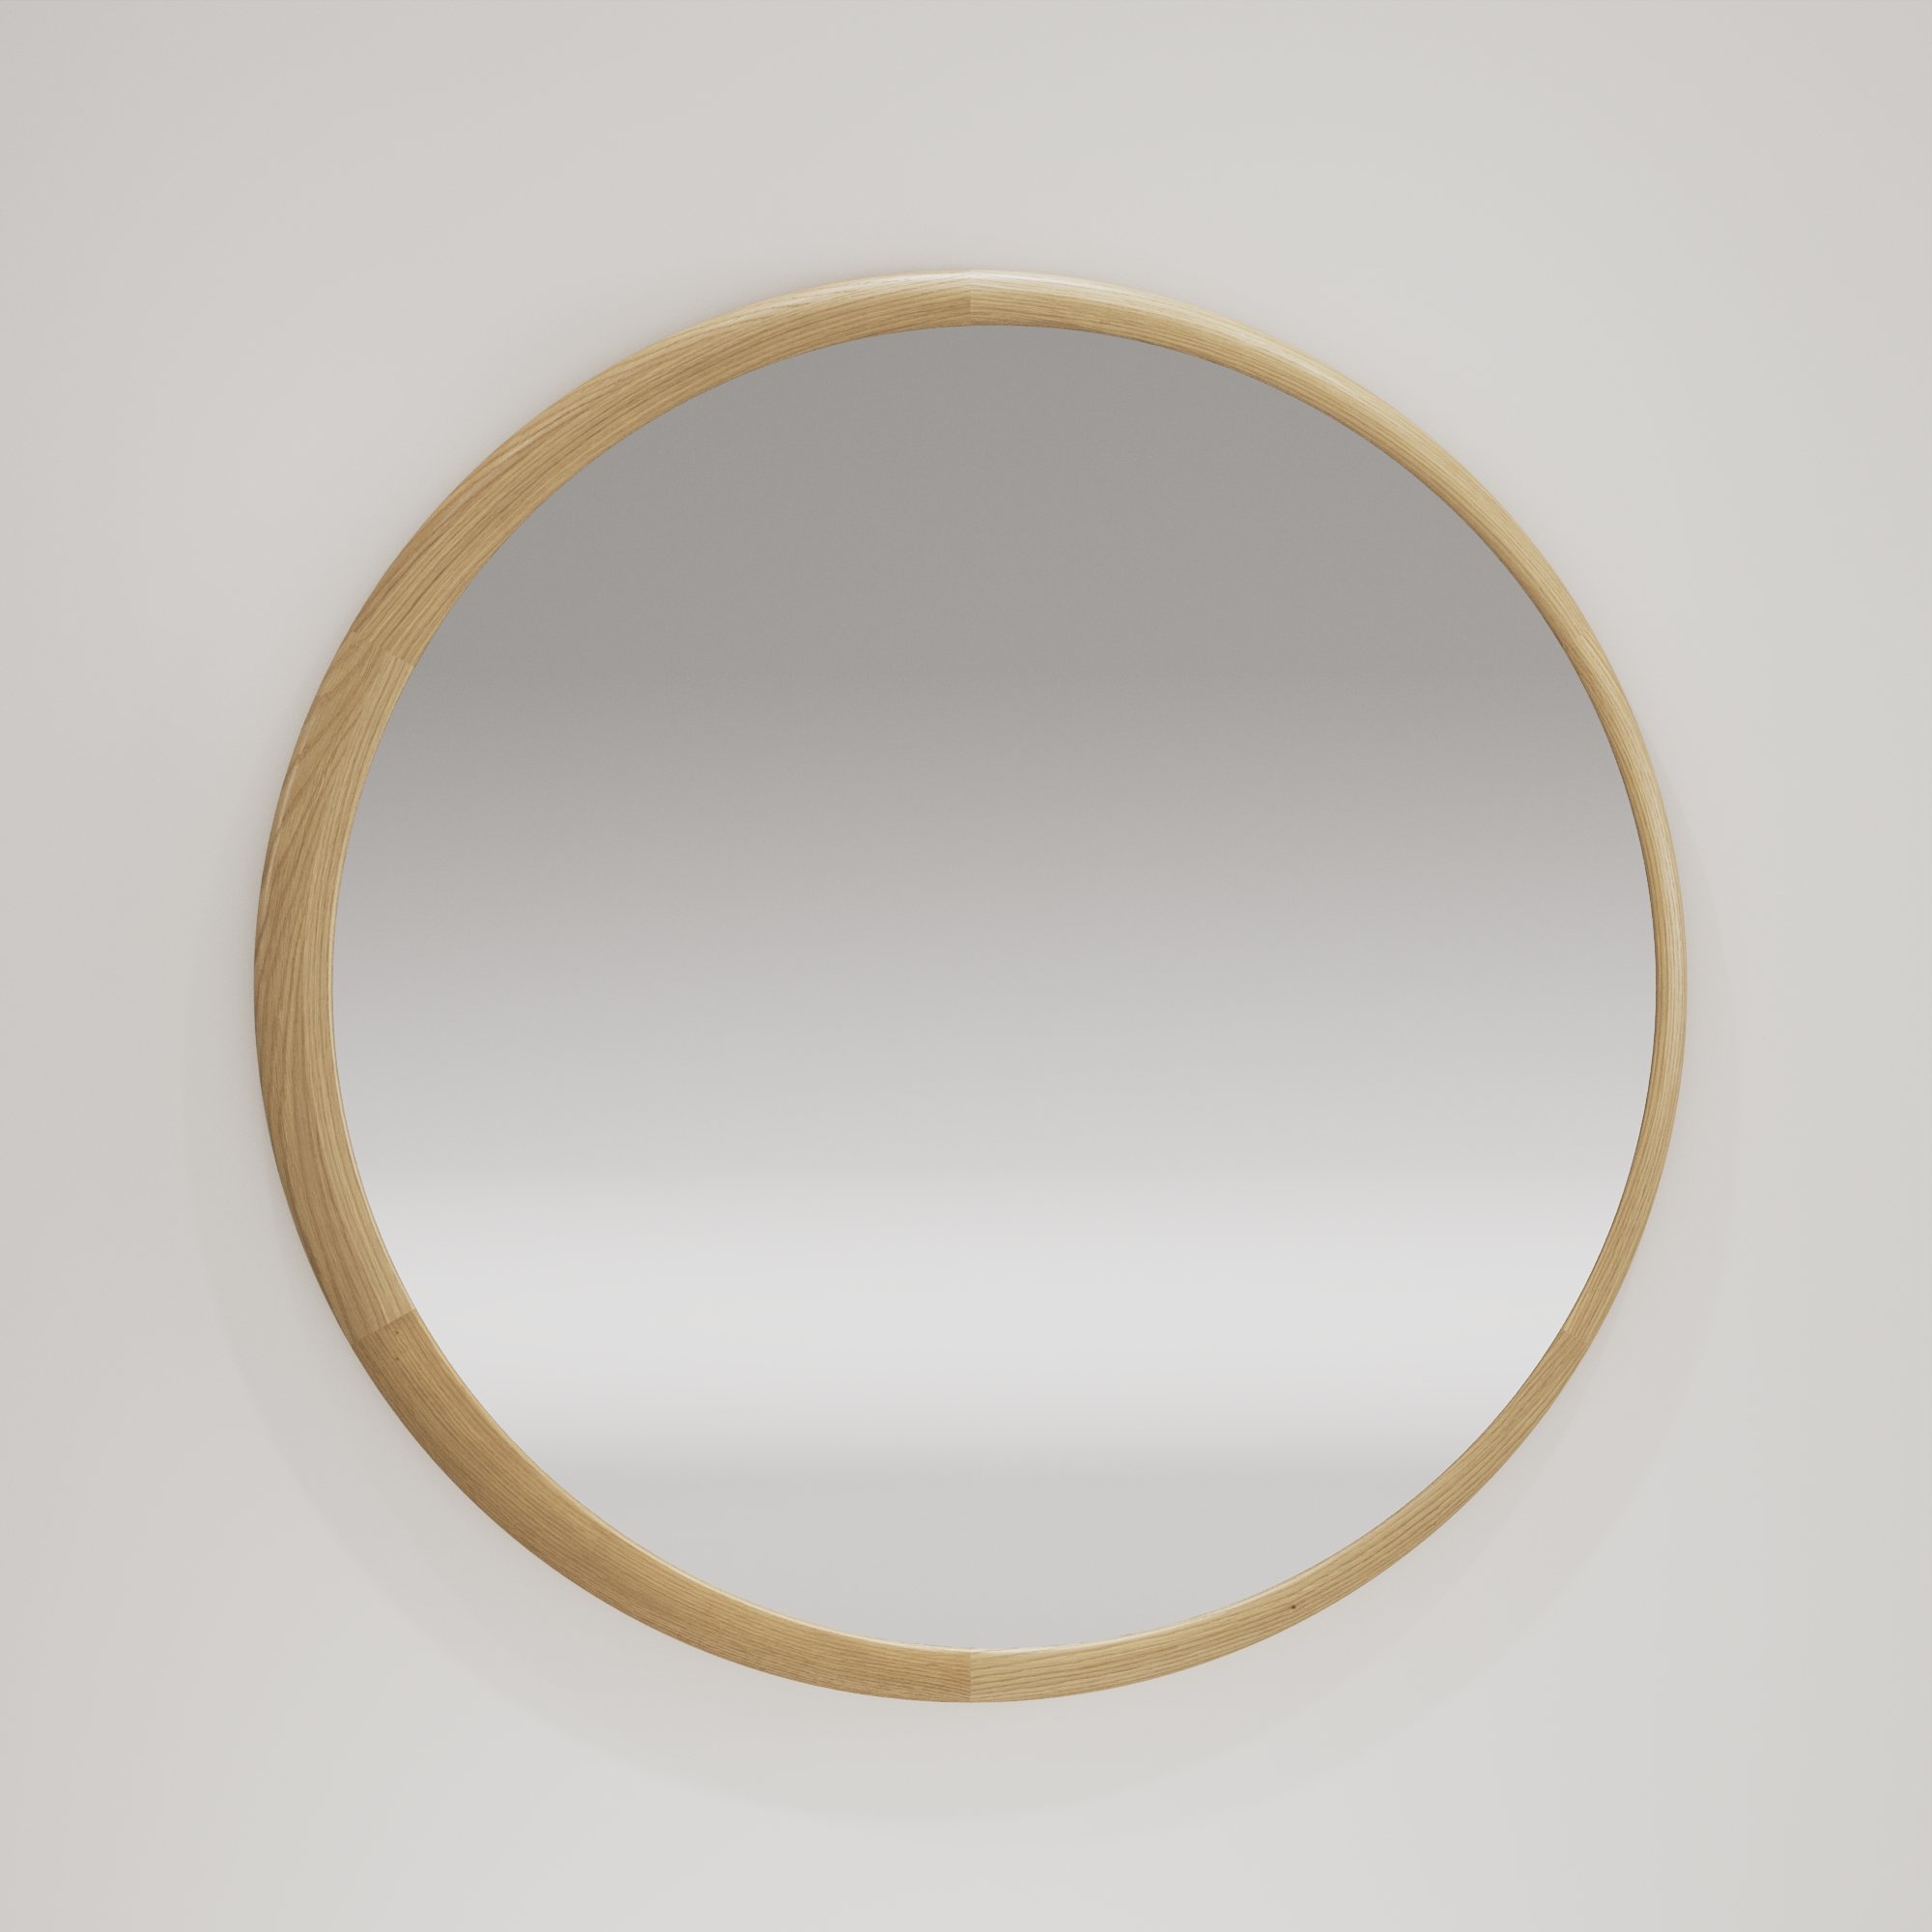 Luna Mirrors | Wewood - Portuguese Joinery